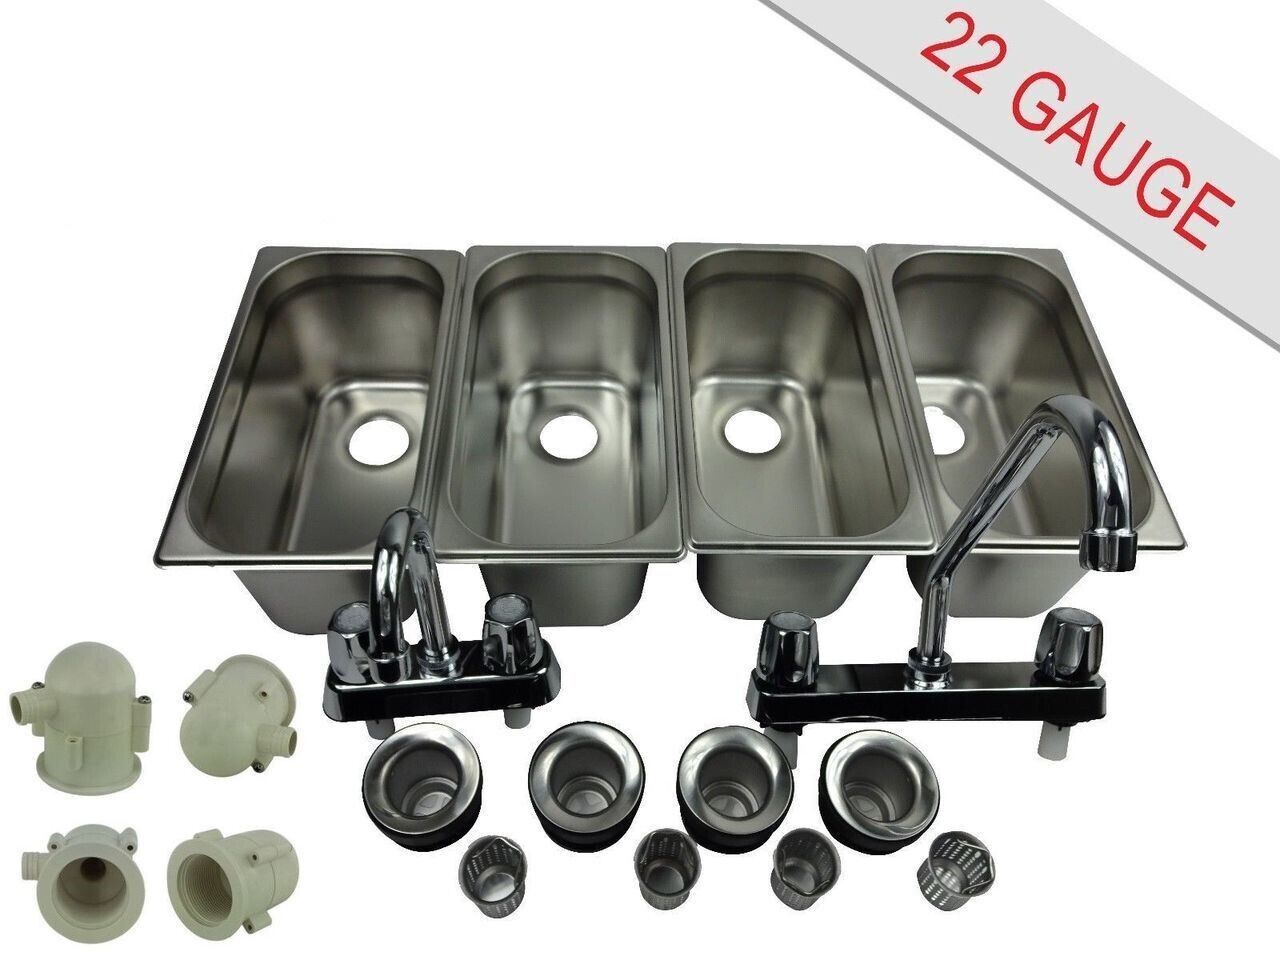 4 Compartment Concession Sink Portable 4 Traps Hand Washing Food Truck Trailer 